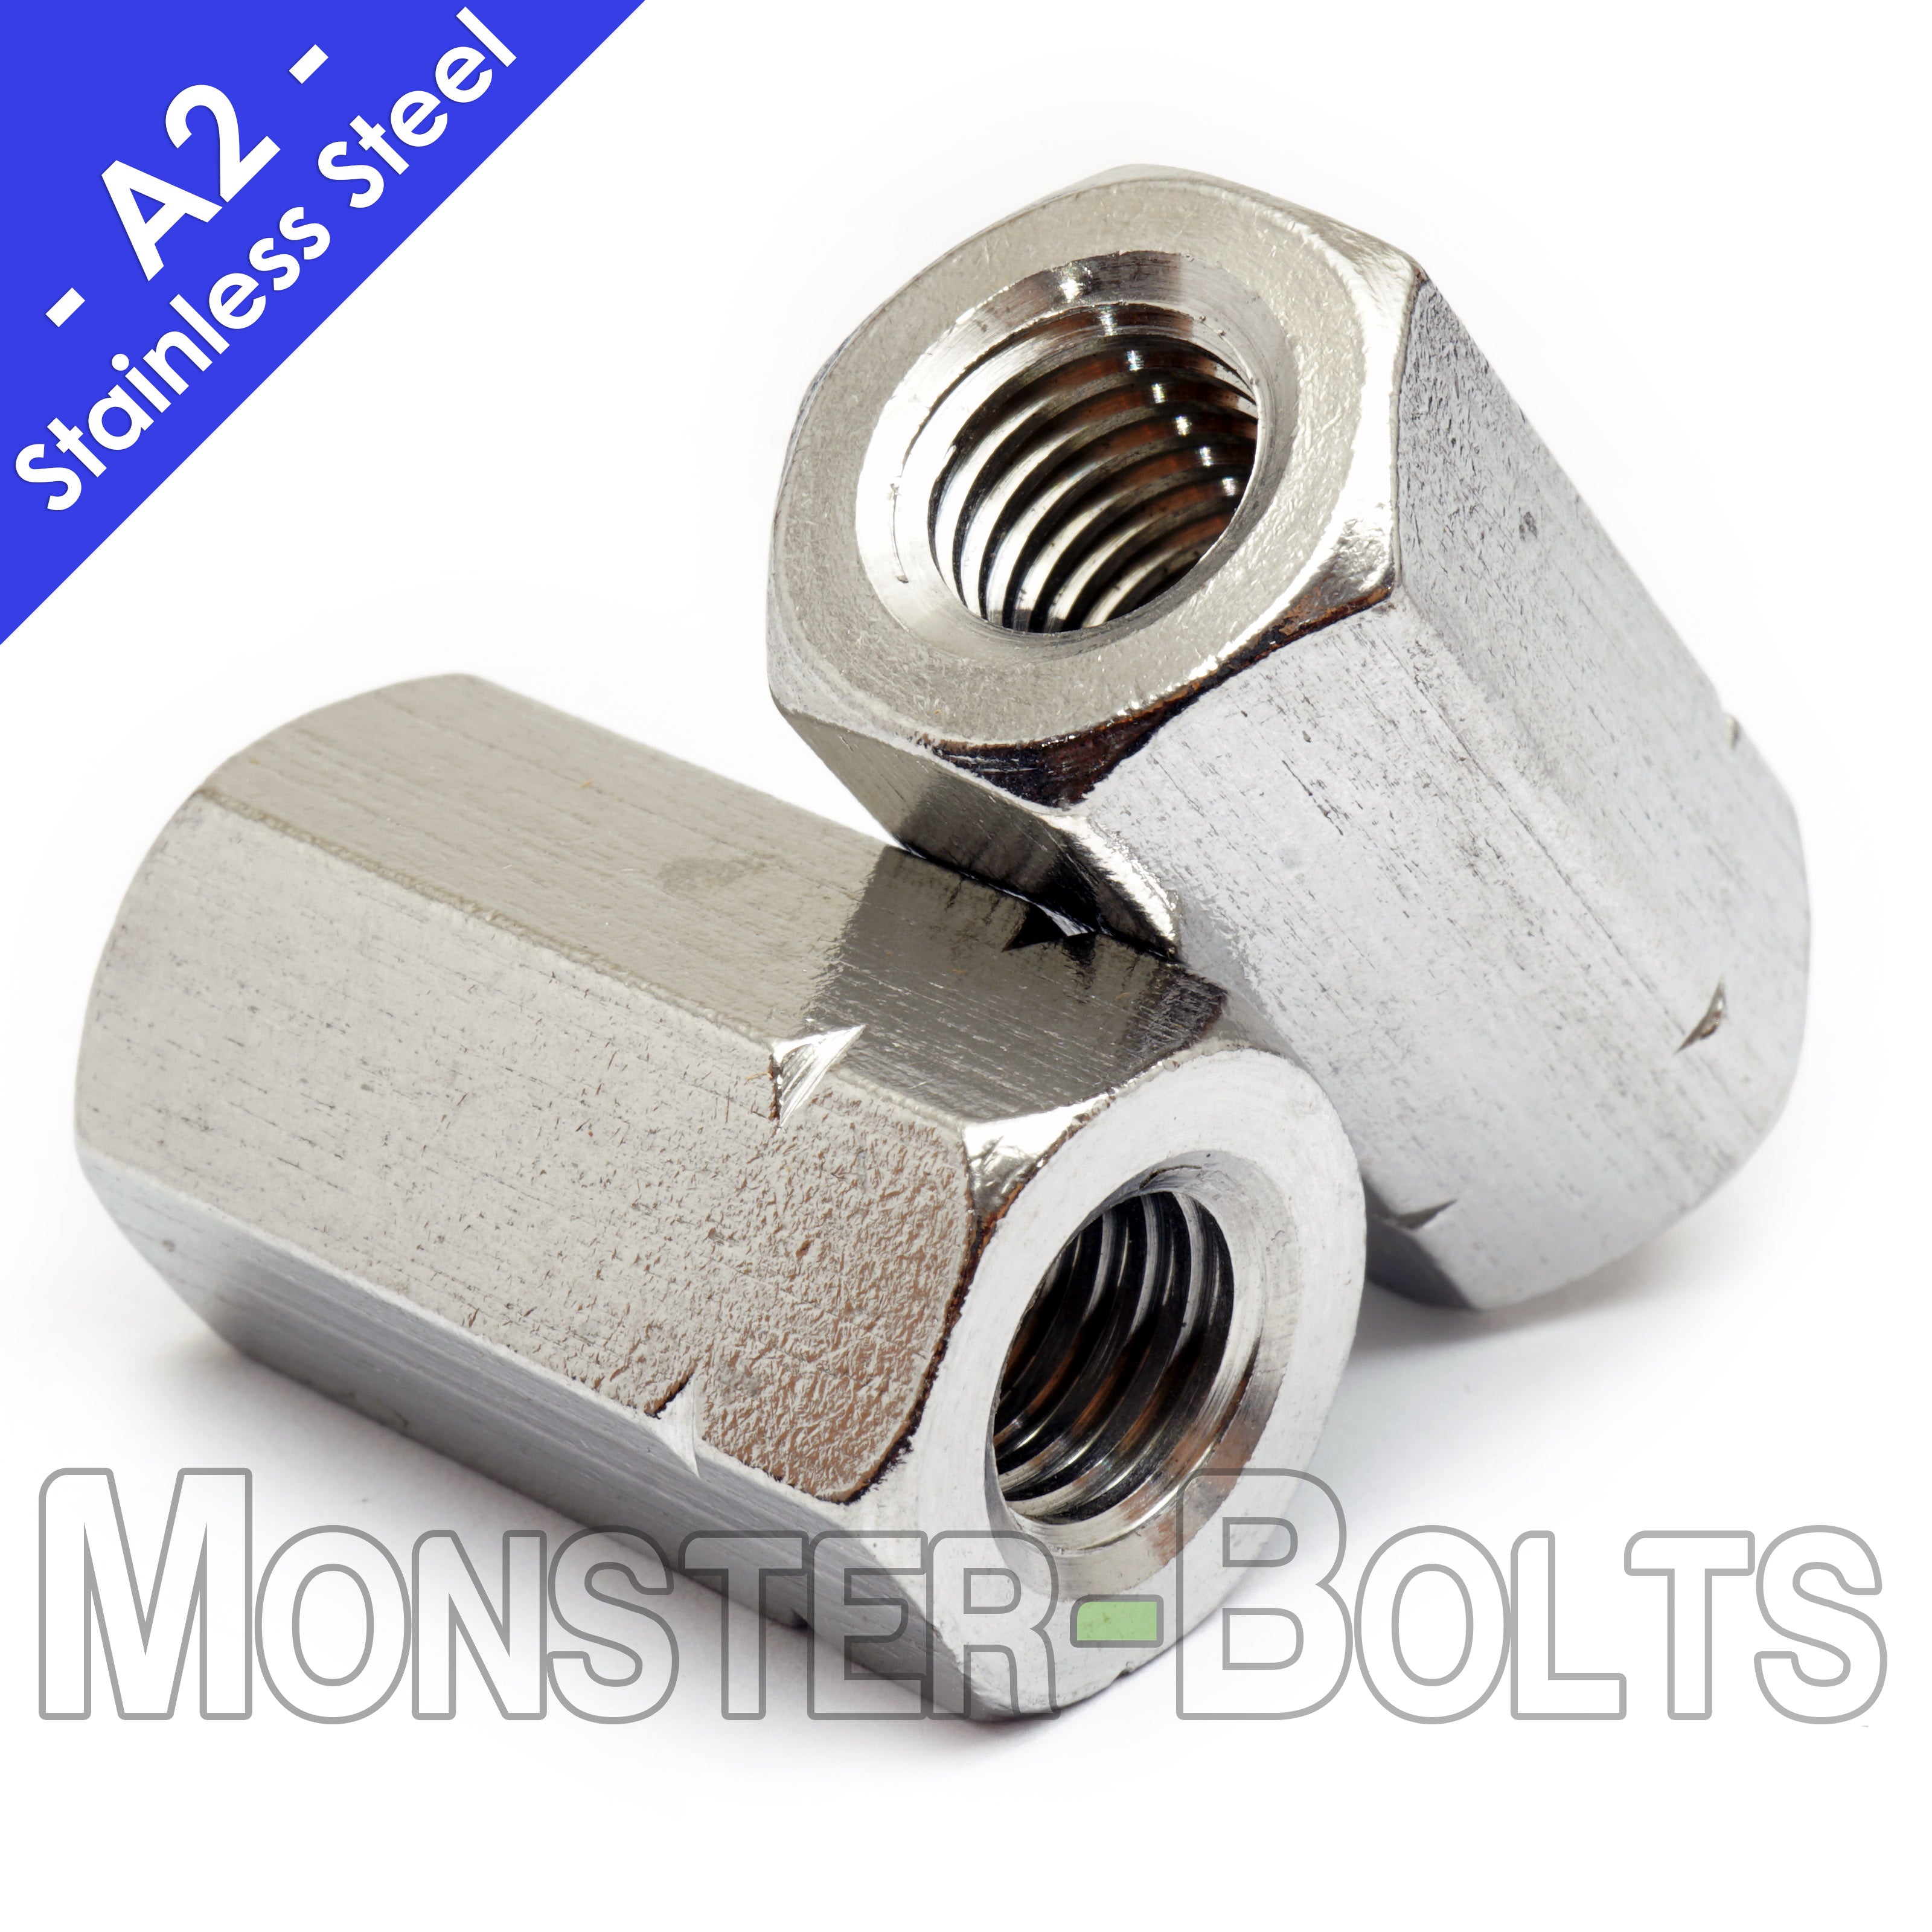 Slotted Self-Tapping Threaded Inserts A2 Stainless Steel - M8 x 15mm